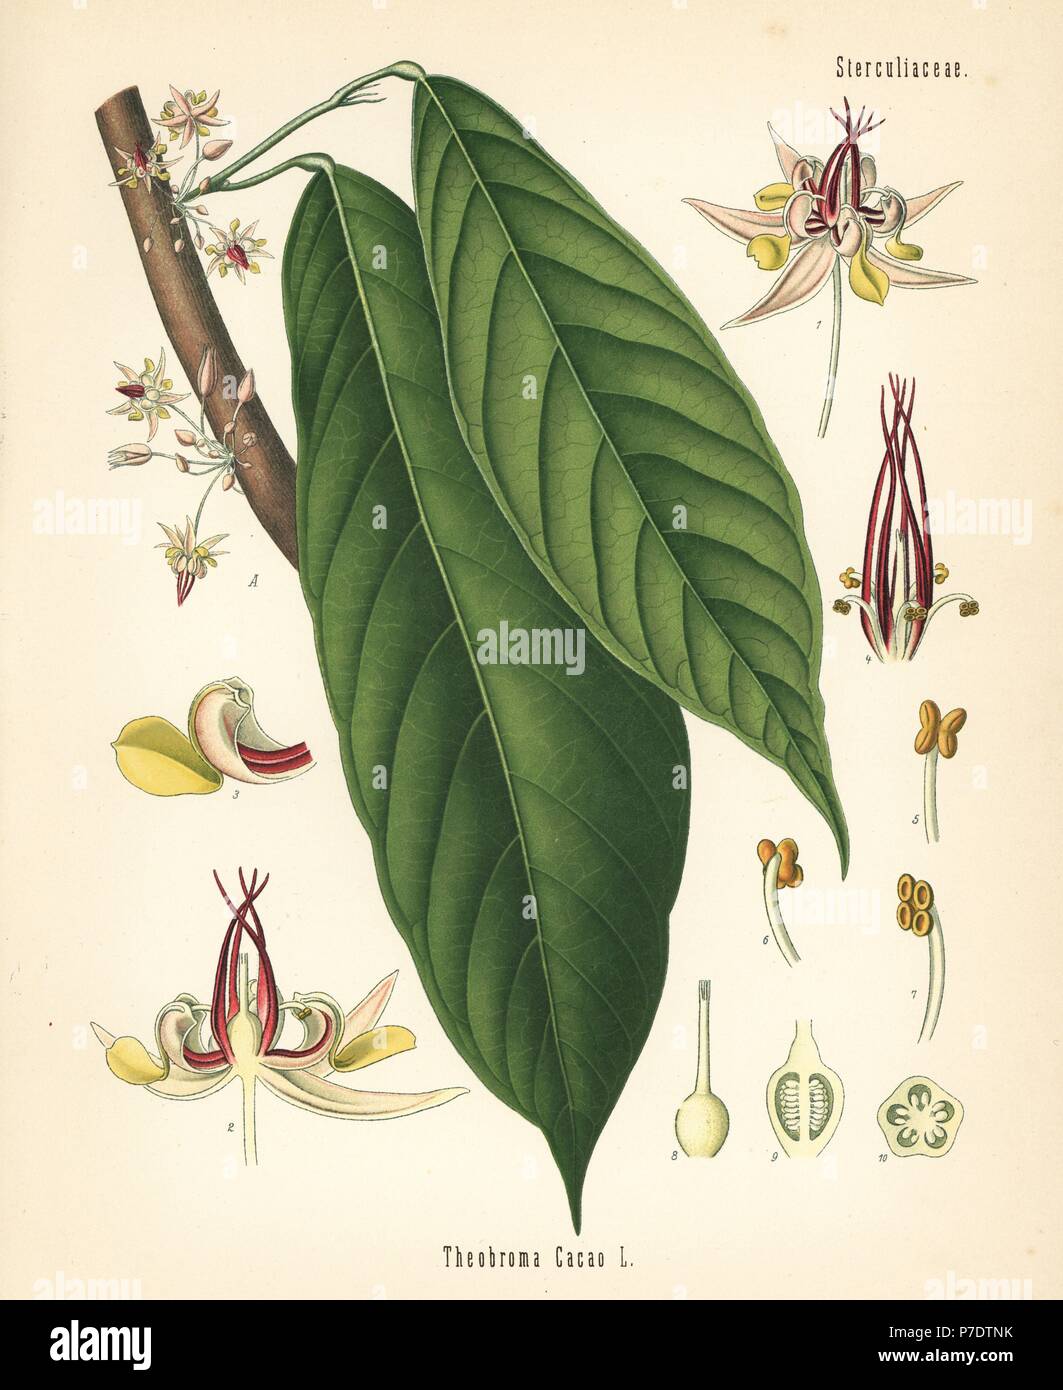 Cocoa or cacao leaf, Theobroma cacao. Chromolithograph after a botanical illustration from Hermann Adolph Koehler's Medicinal Plants, edited by Gustav Pabst, Koehler, Germany, 1887. Stock Photo